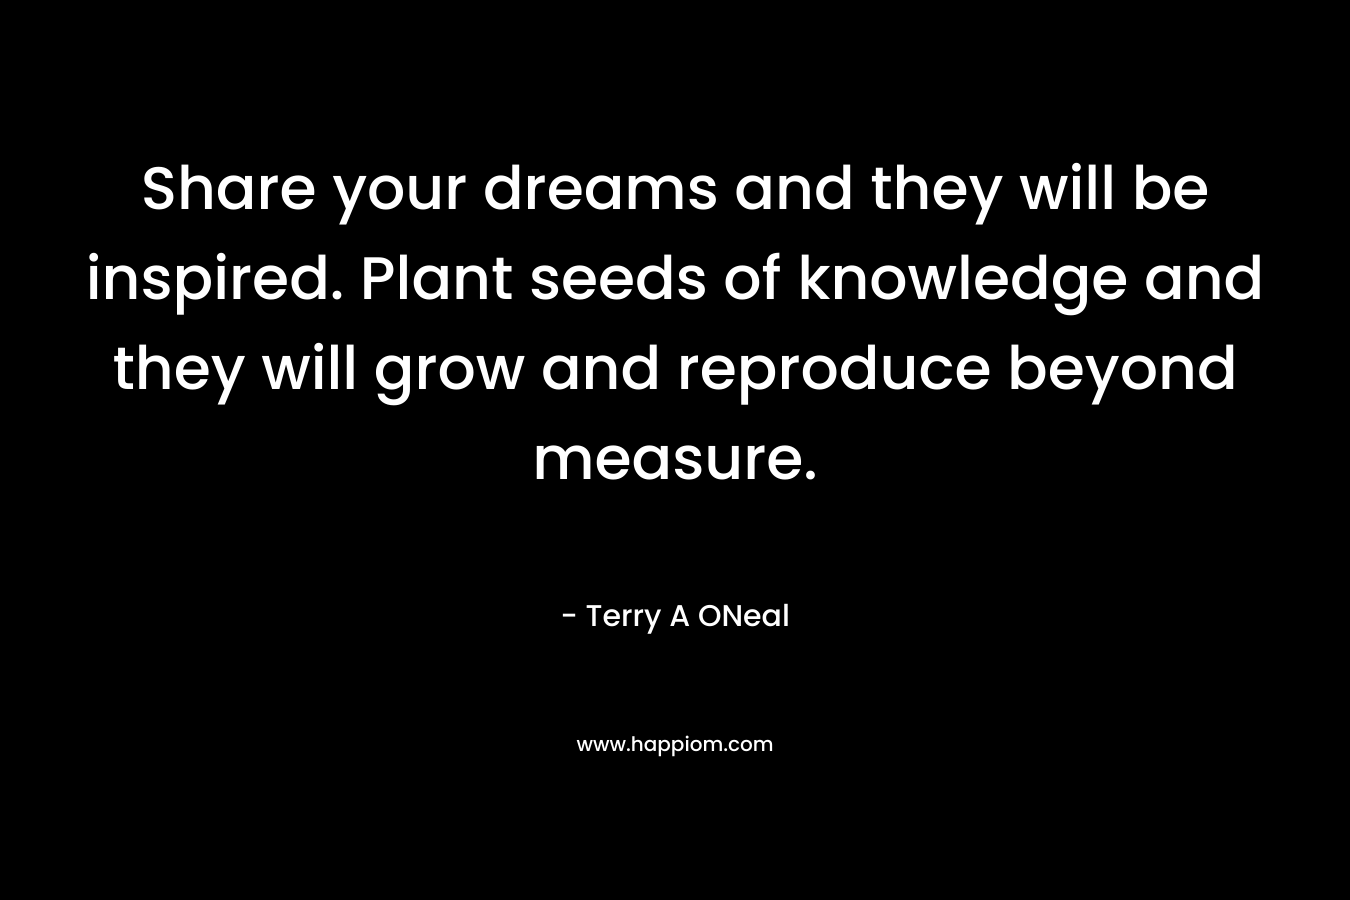 Share your dreams and they will be inspired. Plant seeds of knowledge and they will grow and reproduce beyond measure. – Terry A ONeal